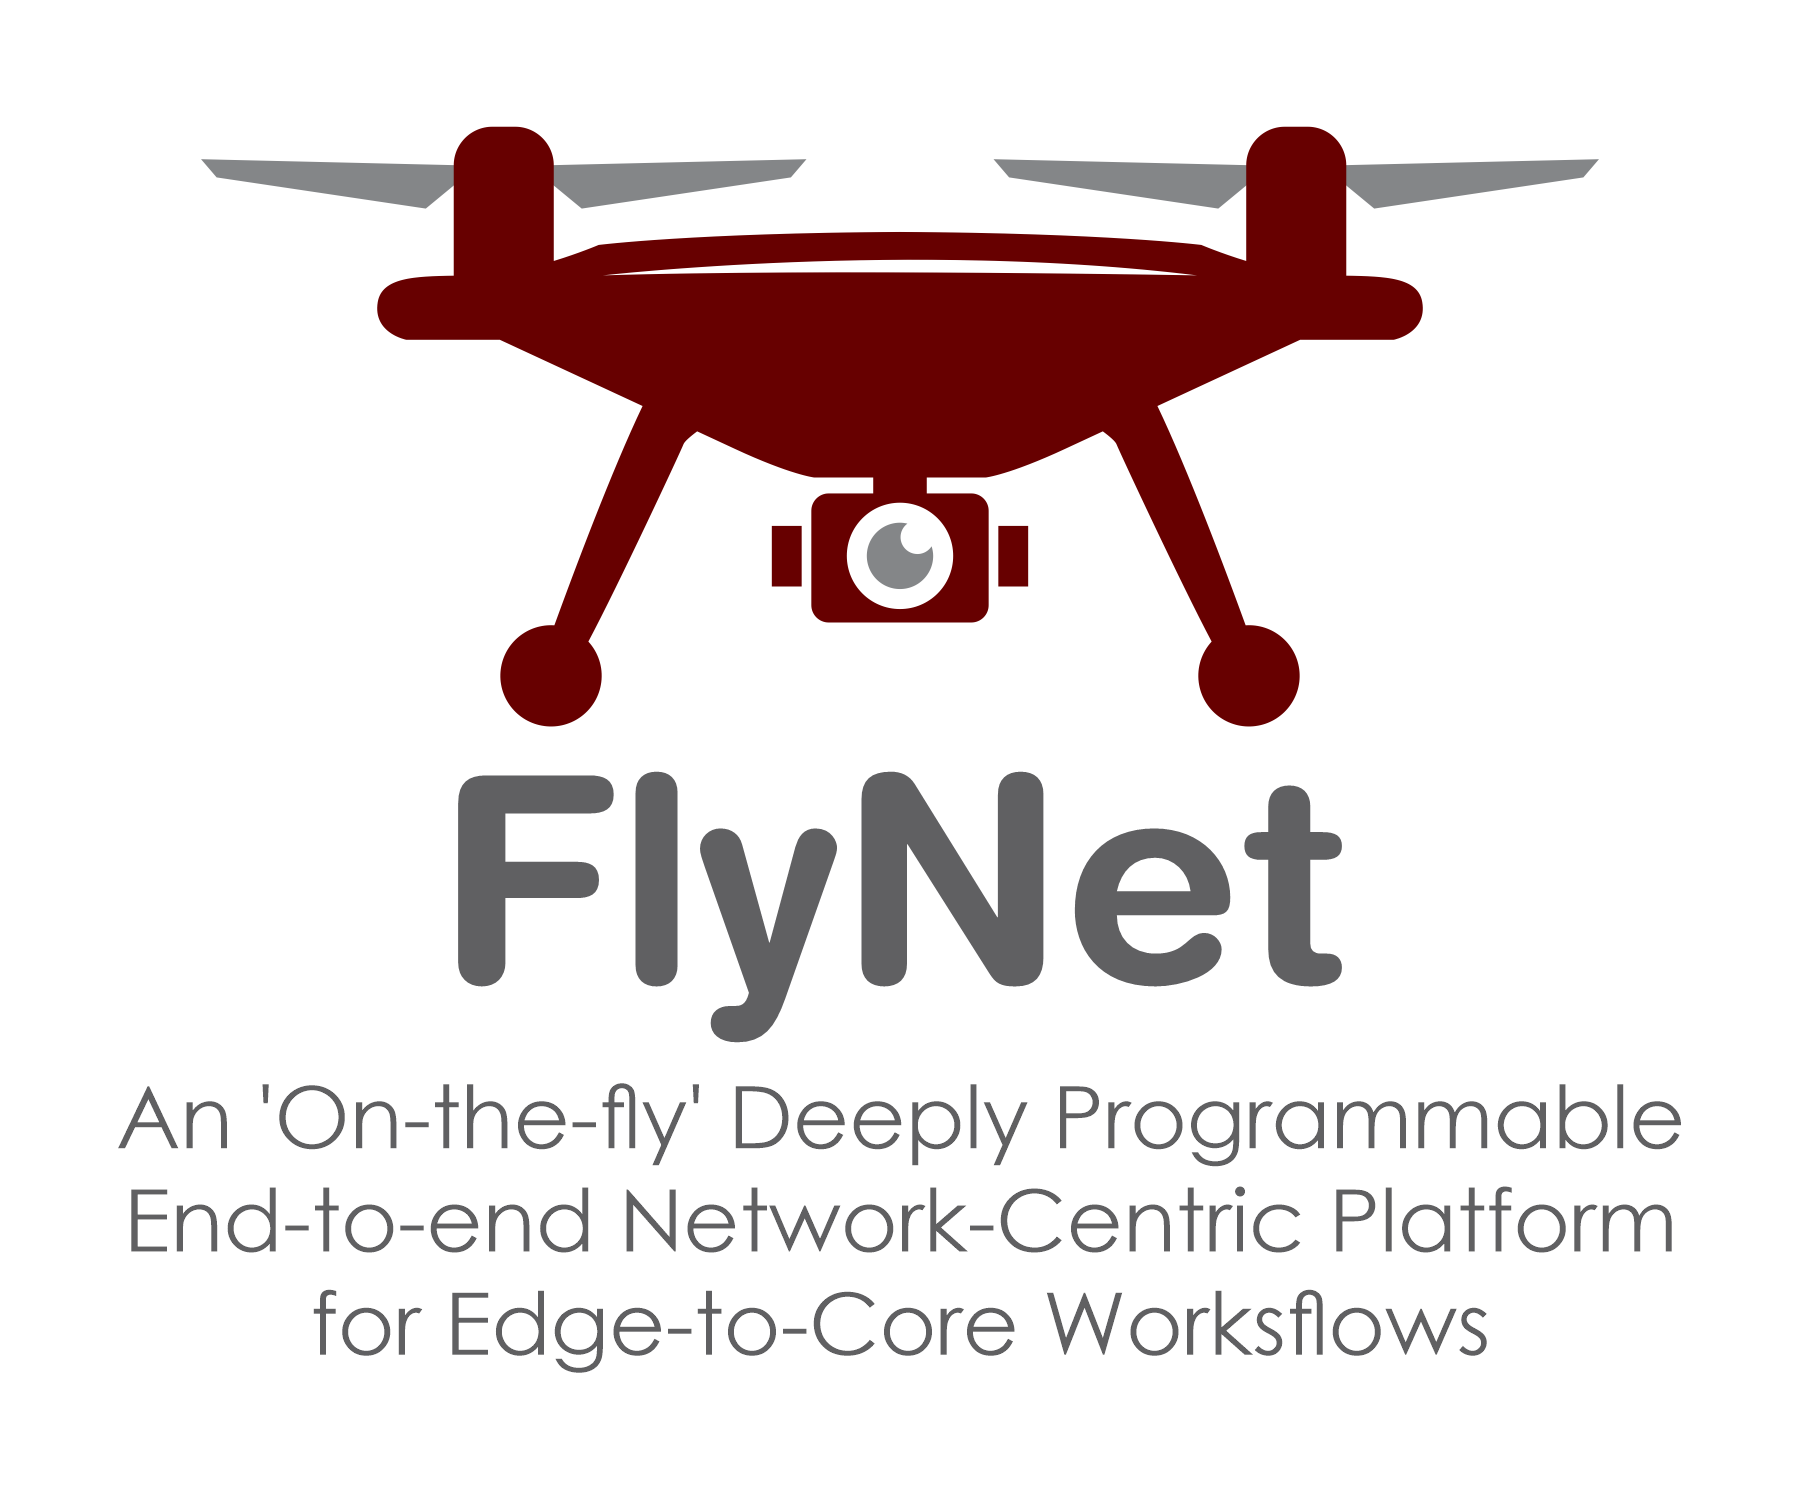 FlyNet: An On-the-fly Deeply Programmable End-to-end Network-Centric Platform for Edge-to-Core Workflows